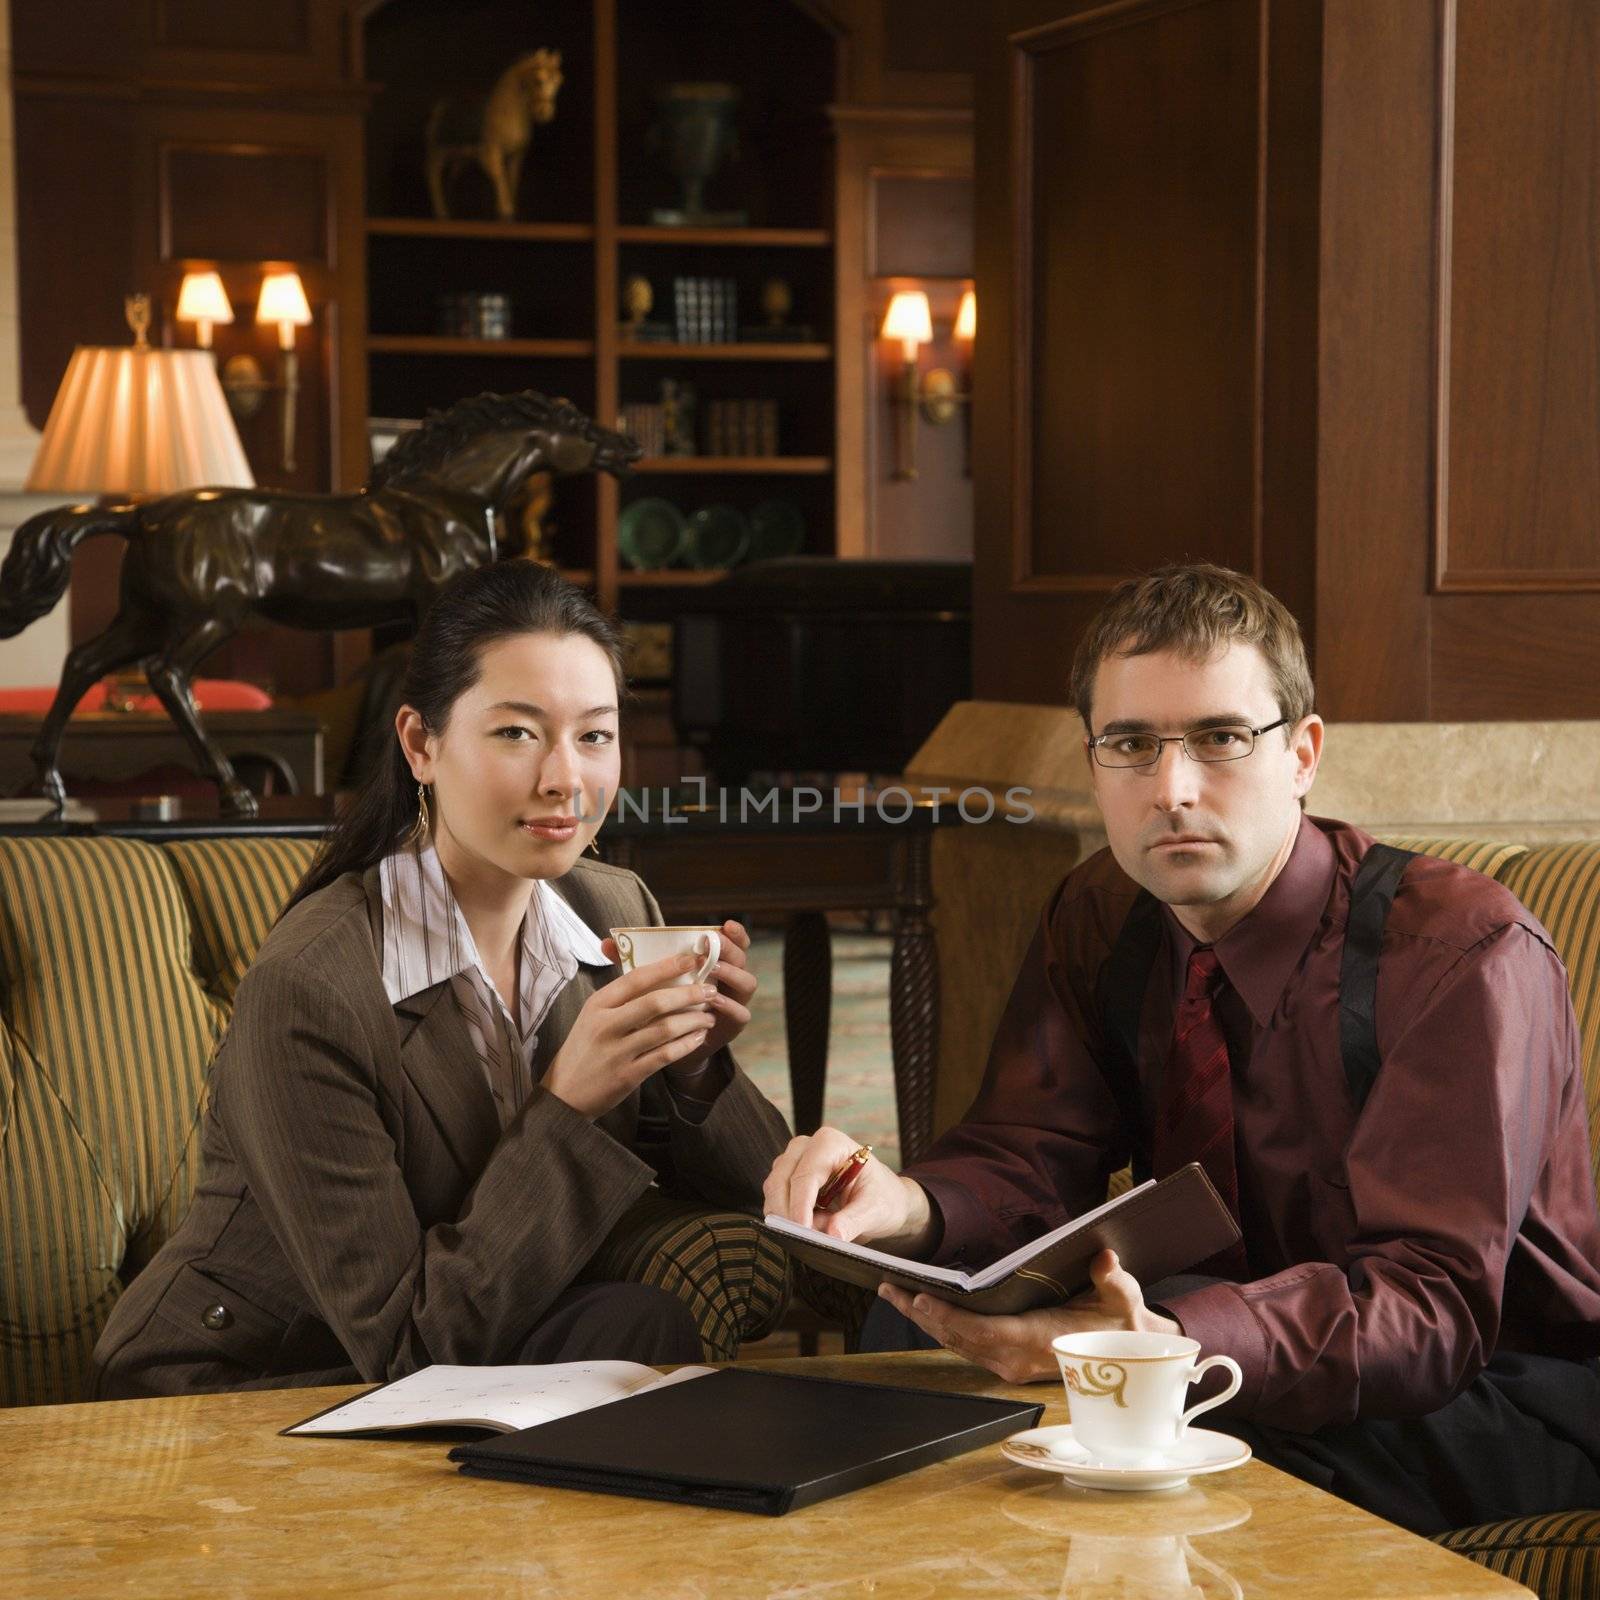 Caucasian mid adult businessman and woman drinking coffee and looking at viewer.